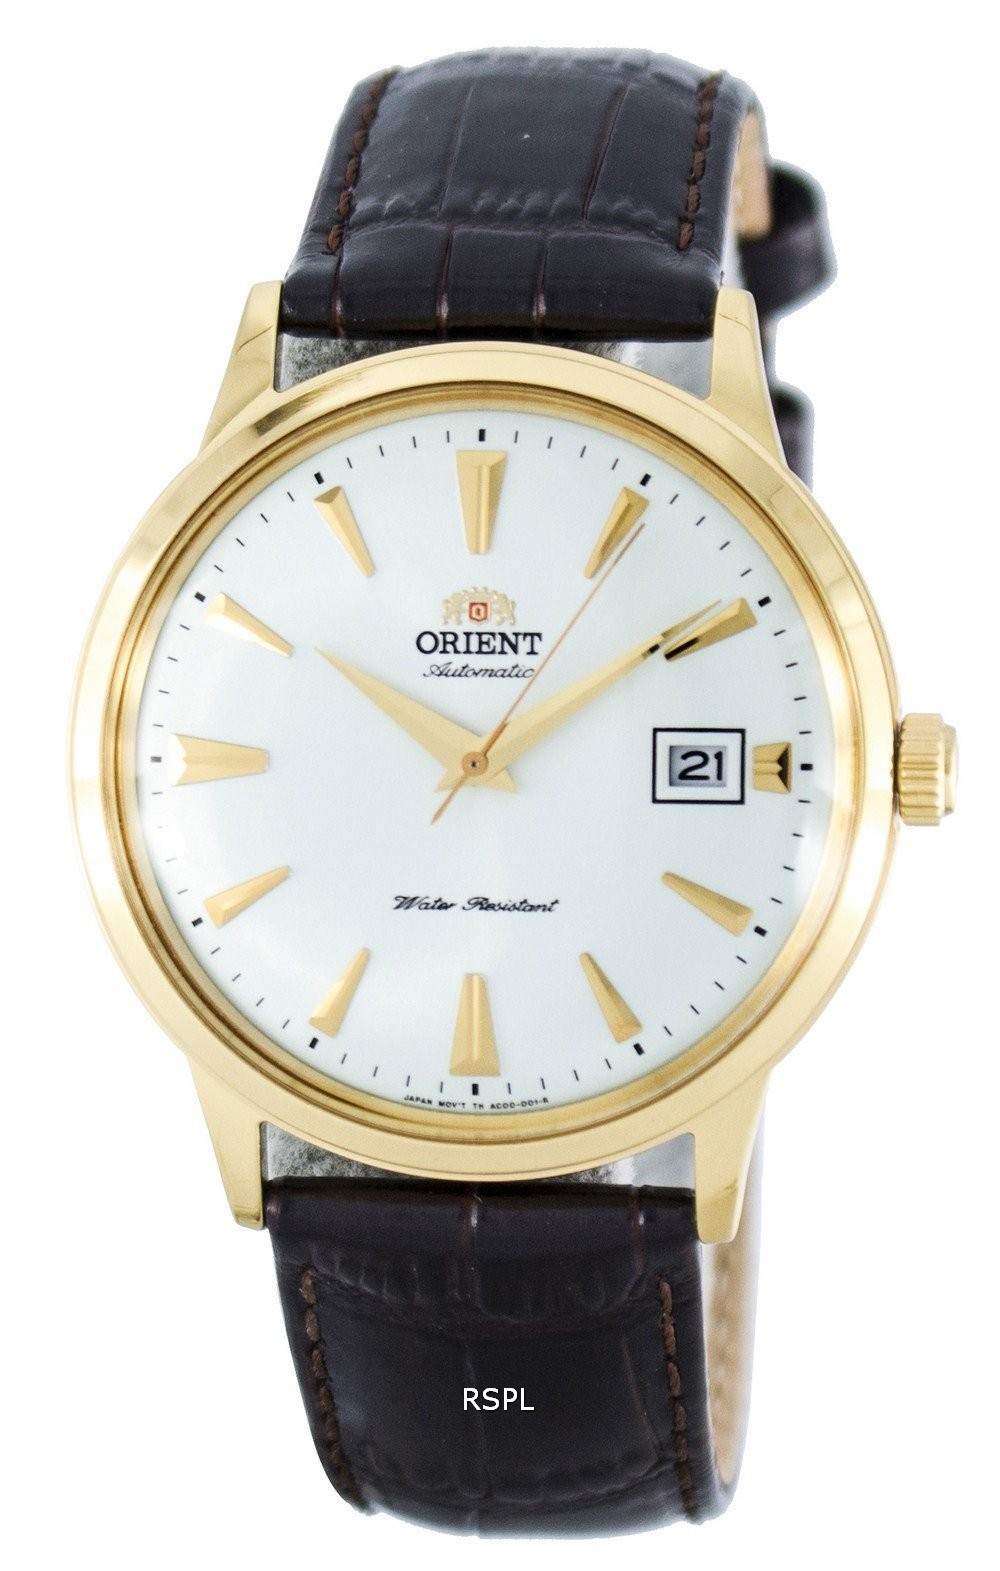 Orient 2nd Generation Bambino Automatic Power Reserve FAC00003W0 Men’s Watch.jpg  by orientwatches